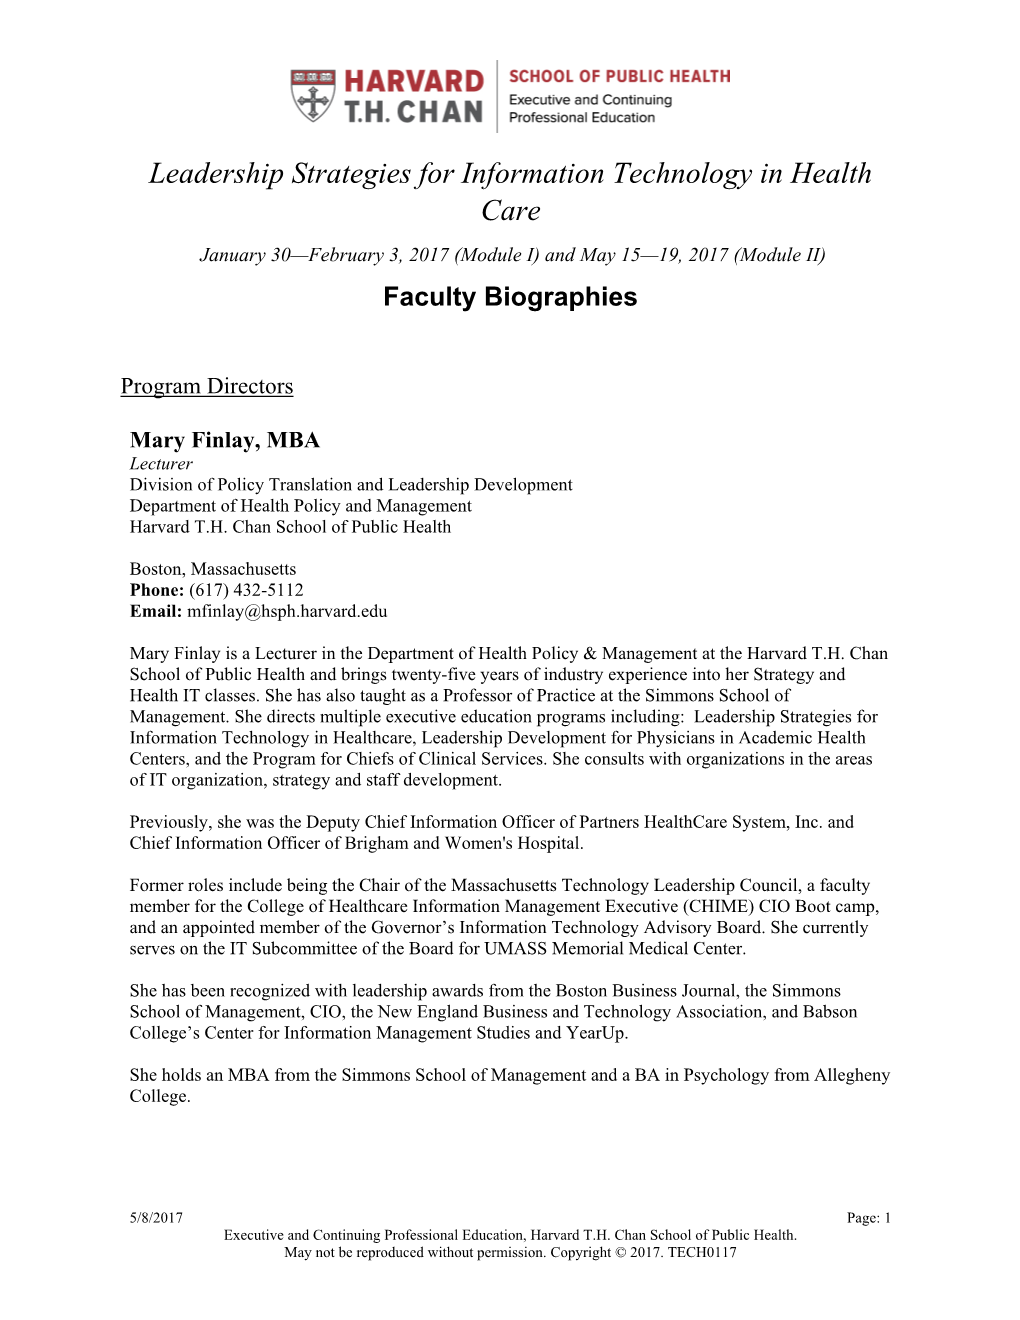 Leadership Strategies for Information Technology in Health Care January 30—February 3, 2017 (Module I) and May 15—19, 2017 (Module II) Faculty Biographies